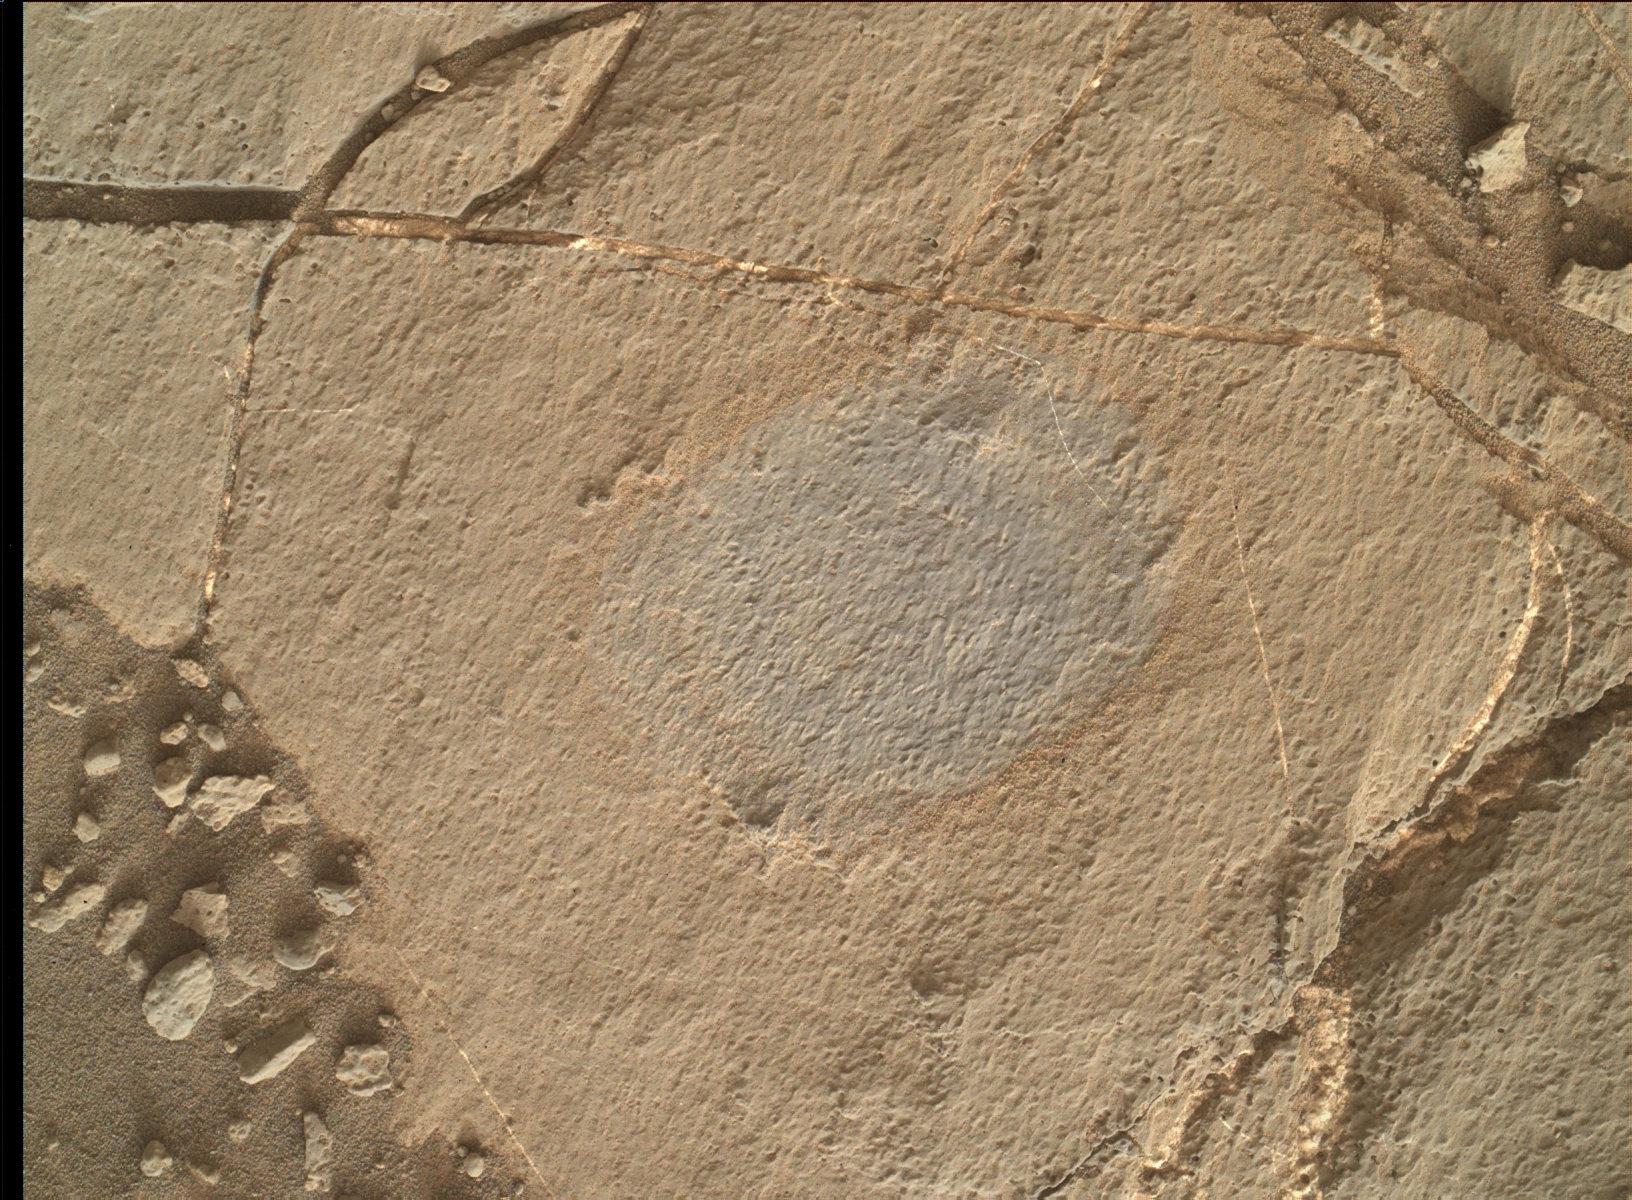 Nasa's Mars rover Curiosity acquired this image using its Mars Hand Lens Imager (MAHLI) on Sol 1157